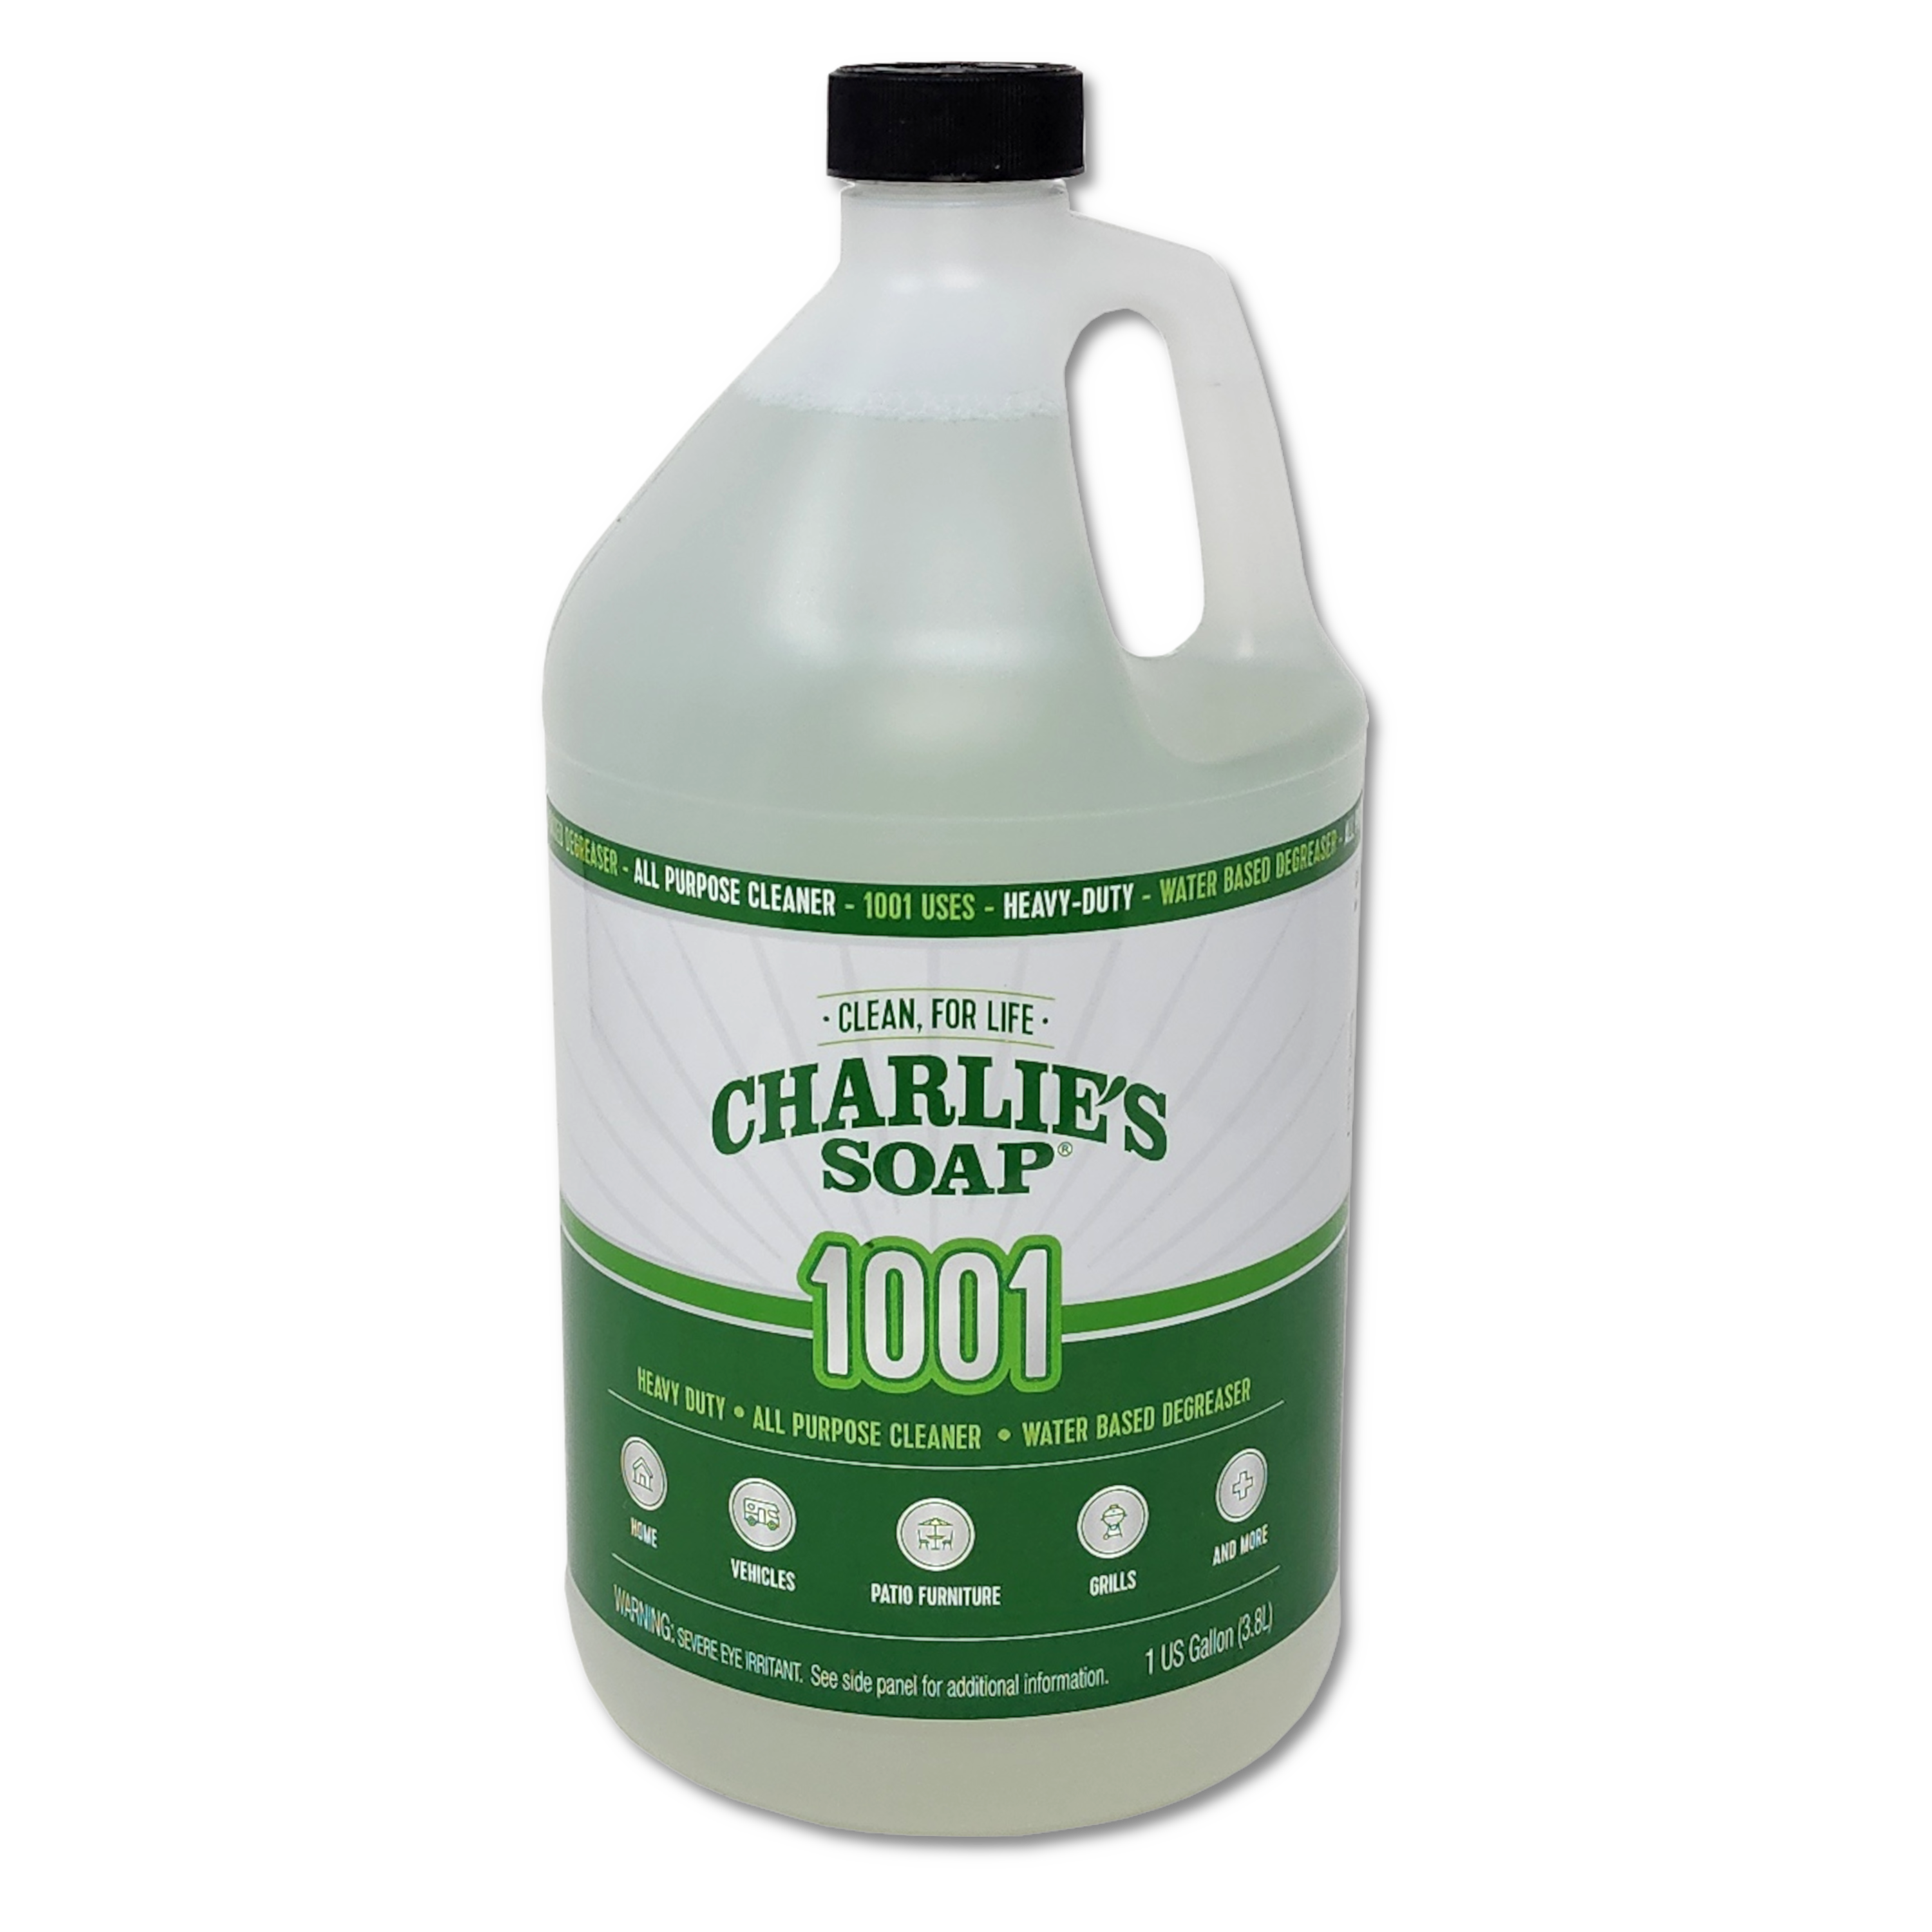 Industrial Degreaser & Cleaner Concentrate Gallon | Burnishine